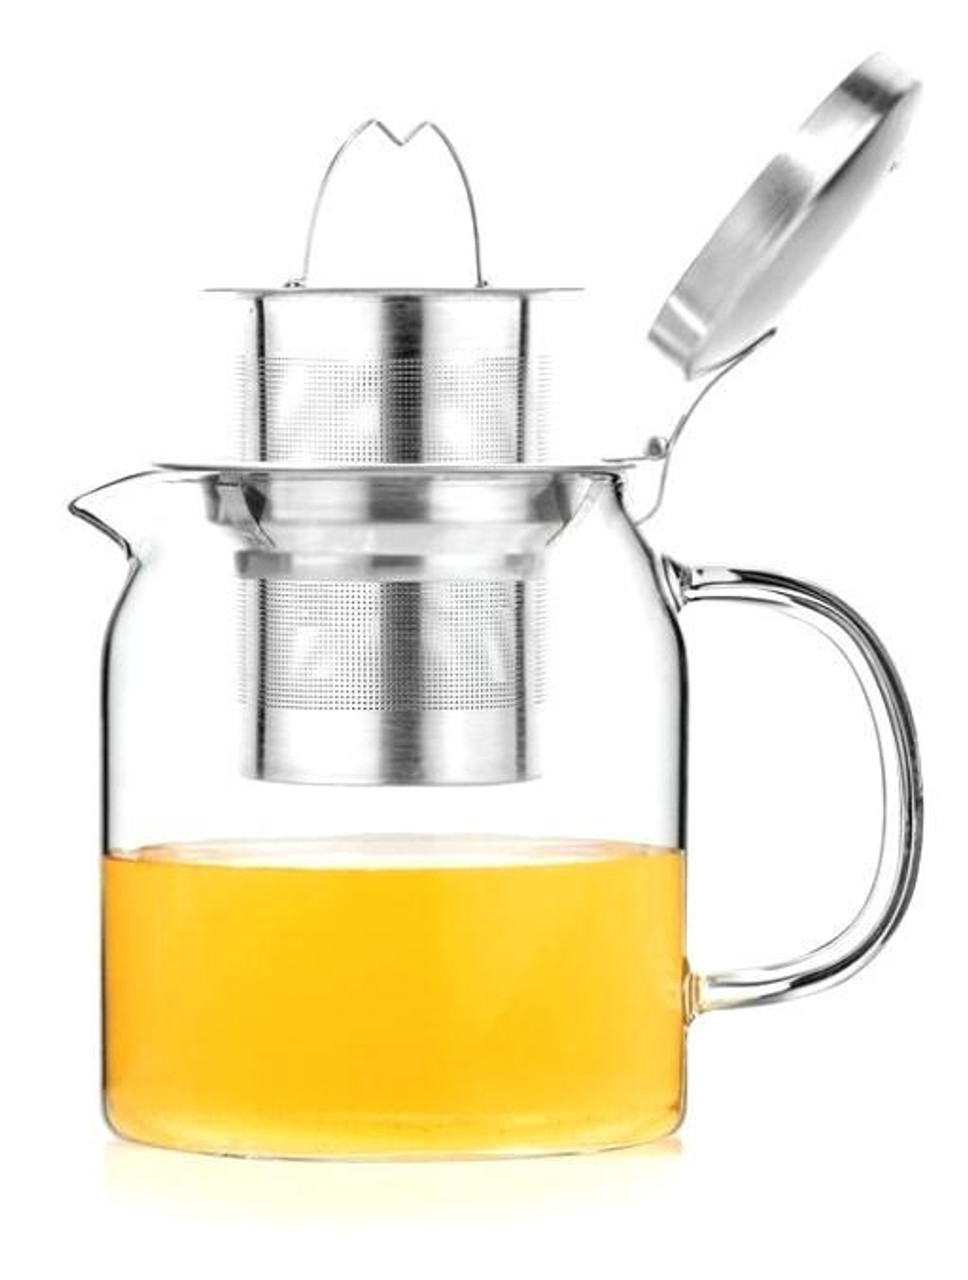 https://cdn11.bigcommerce.com/s-1nr8hwfbkq/images/stencil/1280x1280/products/4068/17277/tealyra-pyxis-small-glass-teapot-kettle-20oz-stove-top-safe__27012.1691538561.jpg?c=2